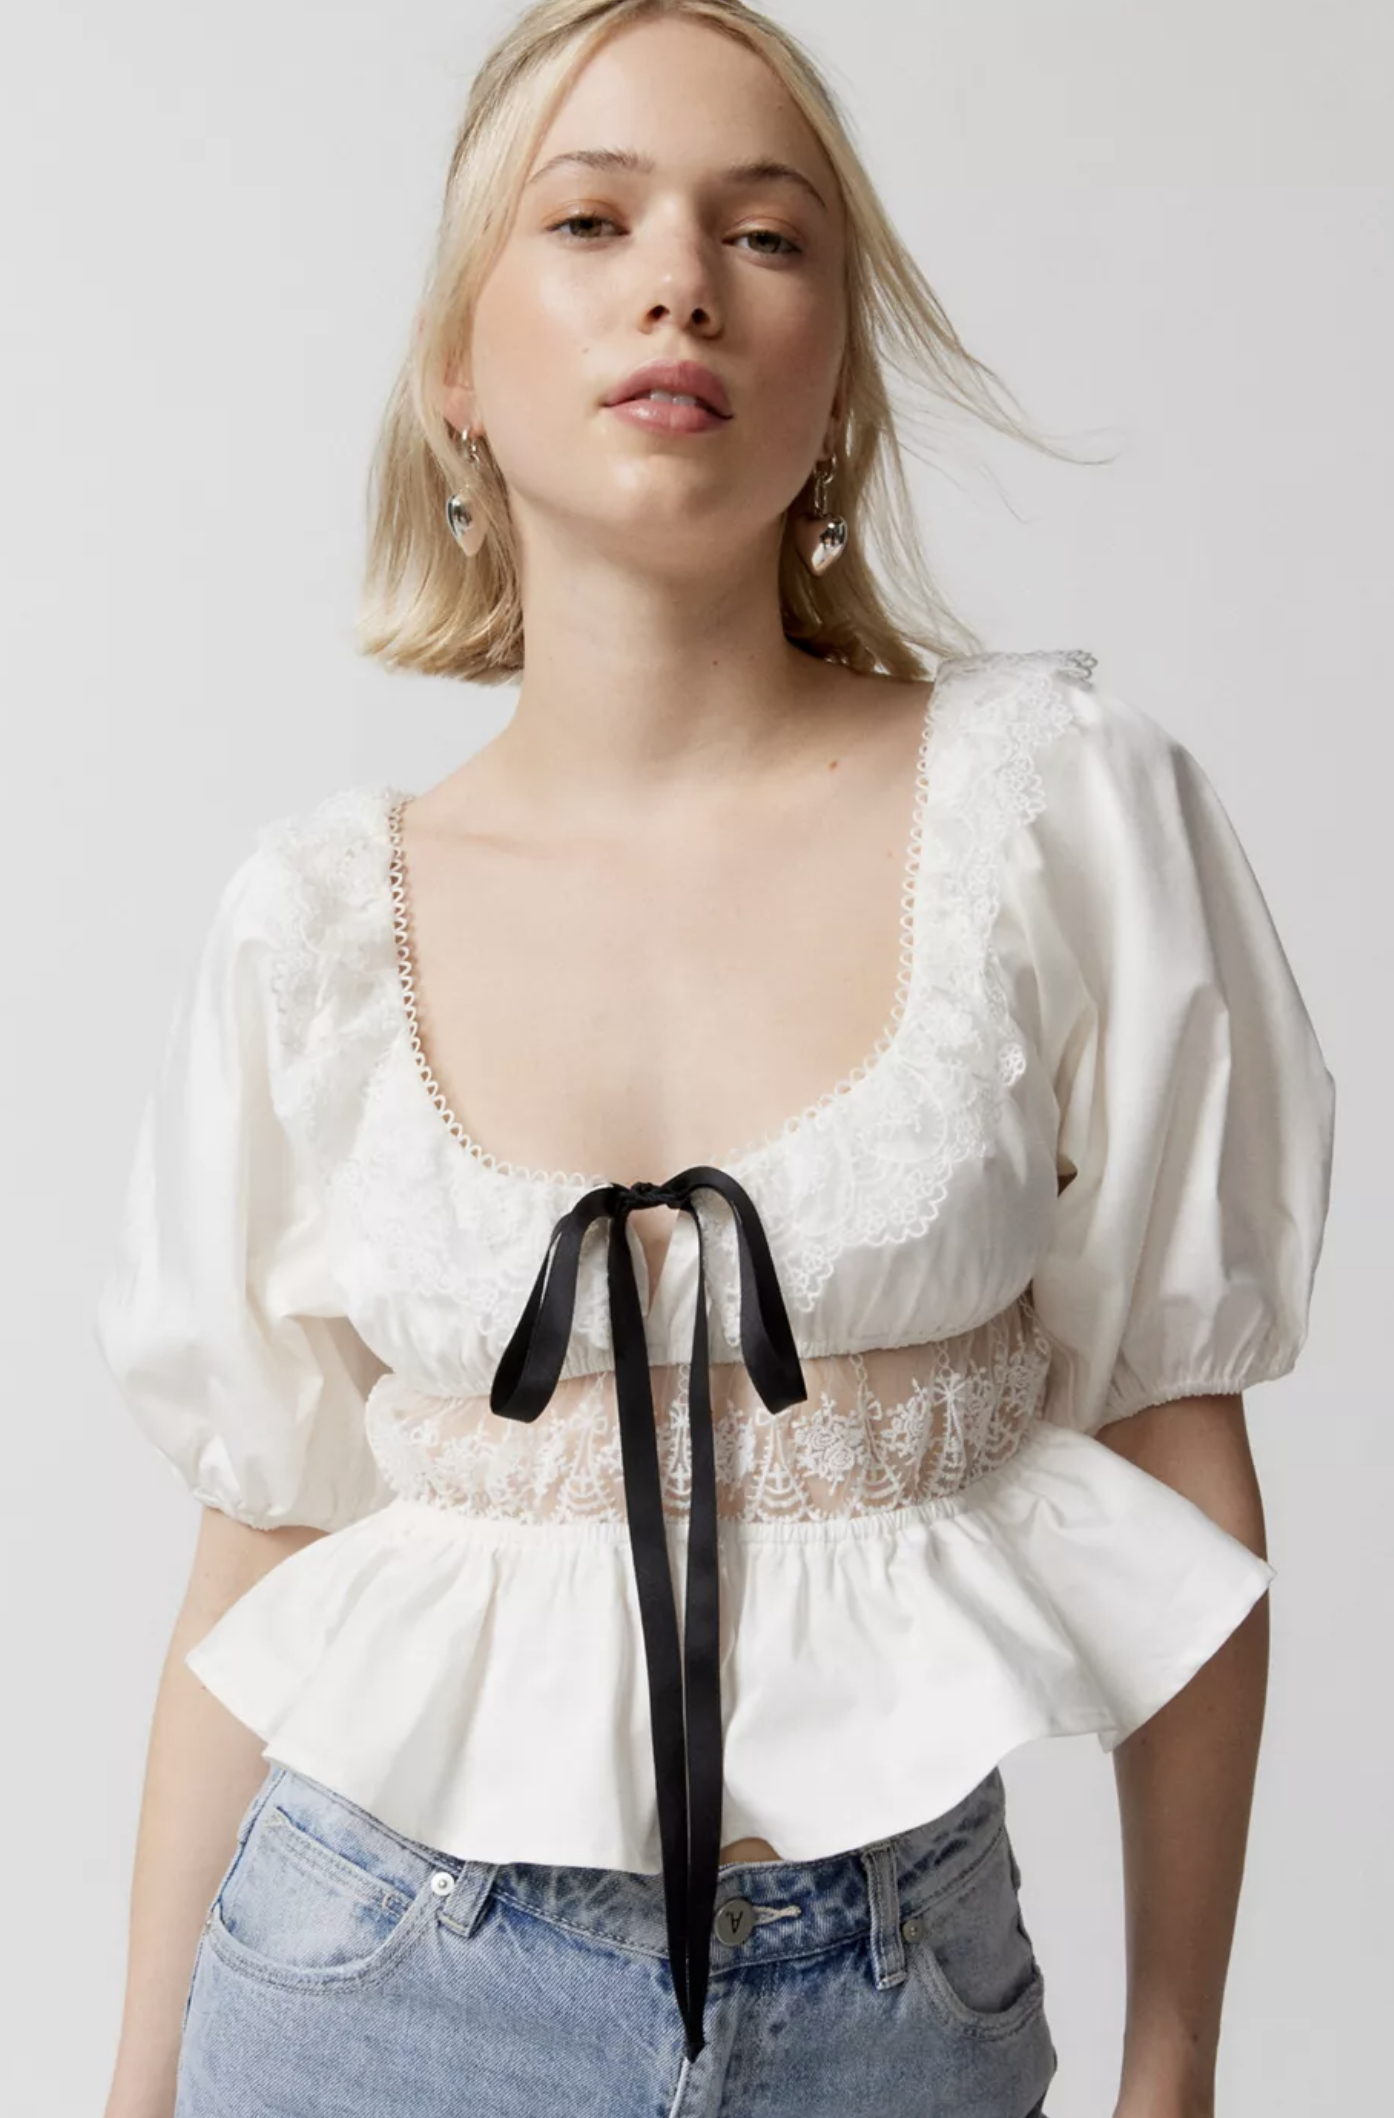 model wearing the shirt in white with a black bow at its center